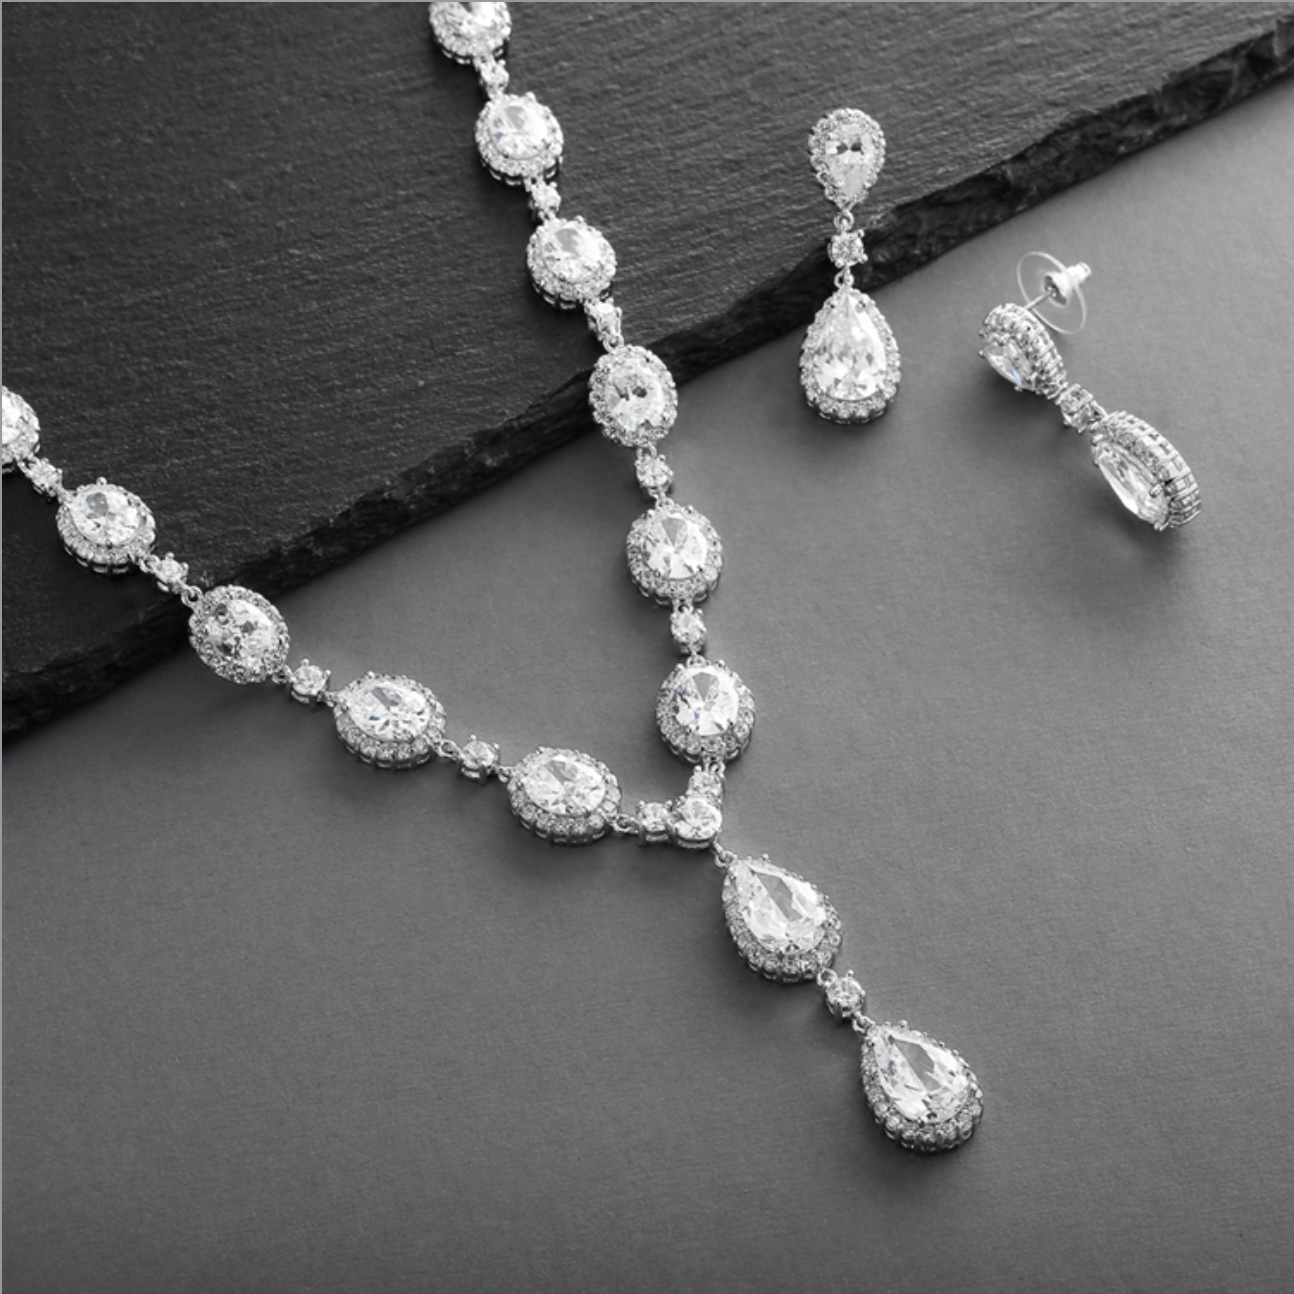 Bridal Necklace Set with Bold CZ Pears and Ovals